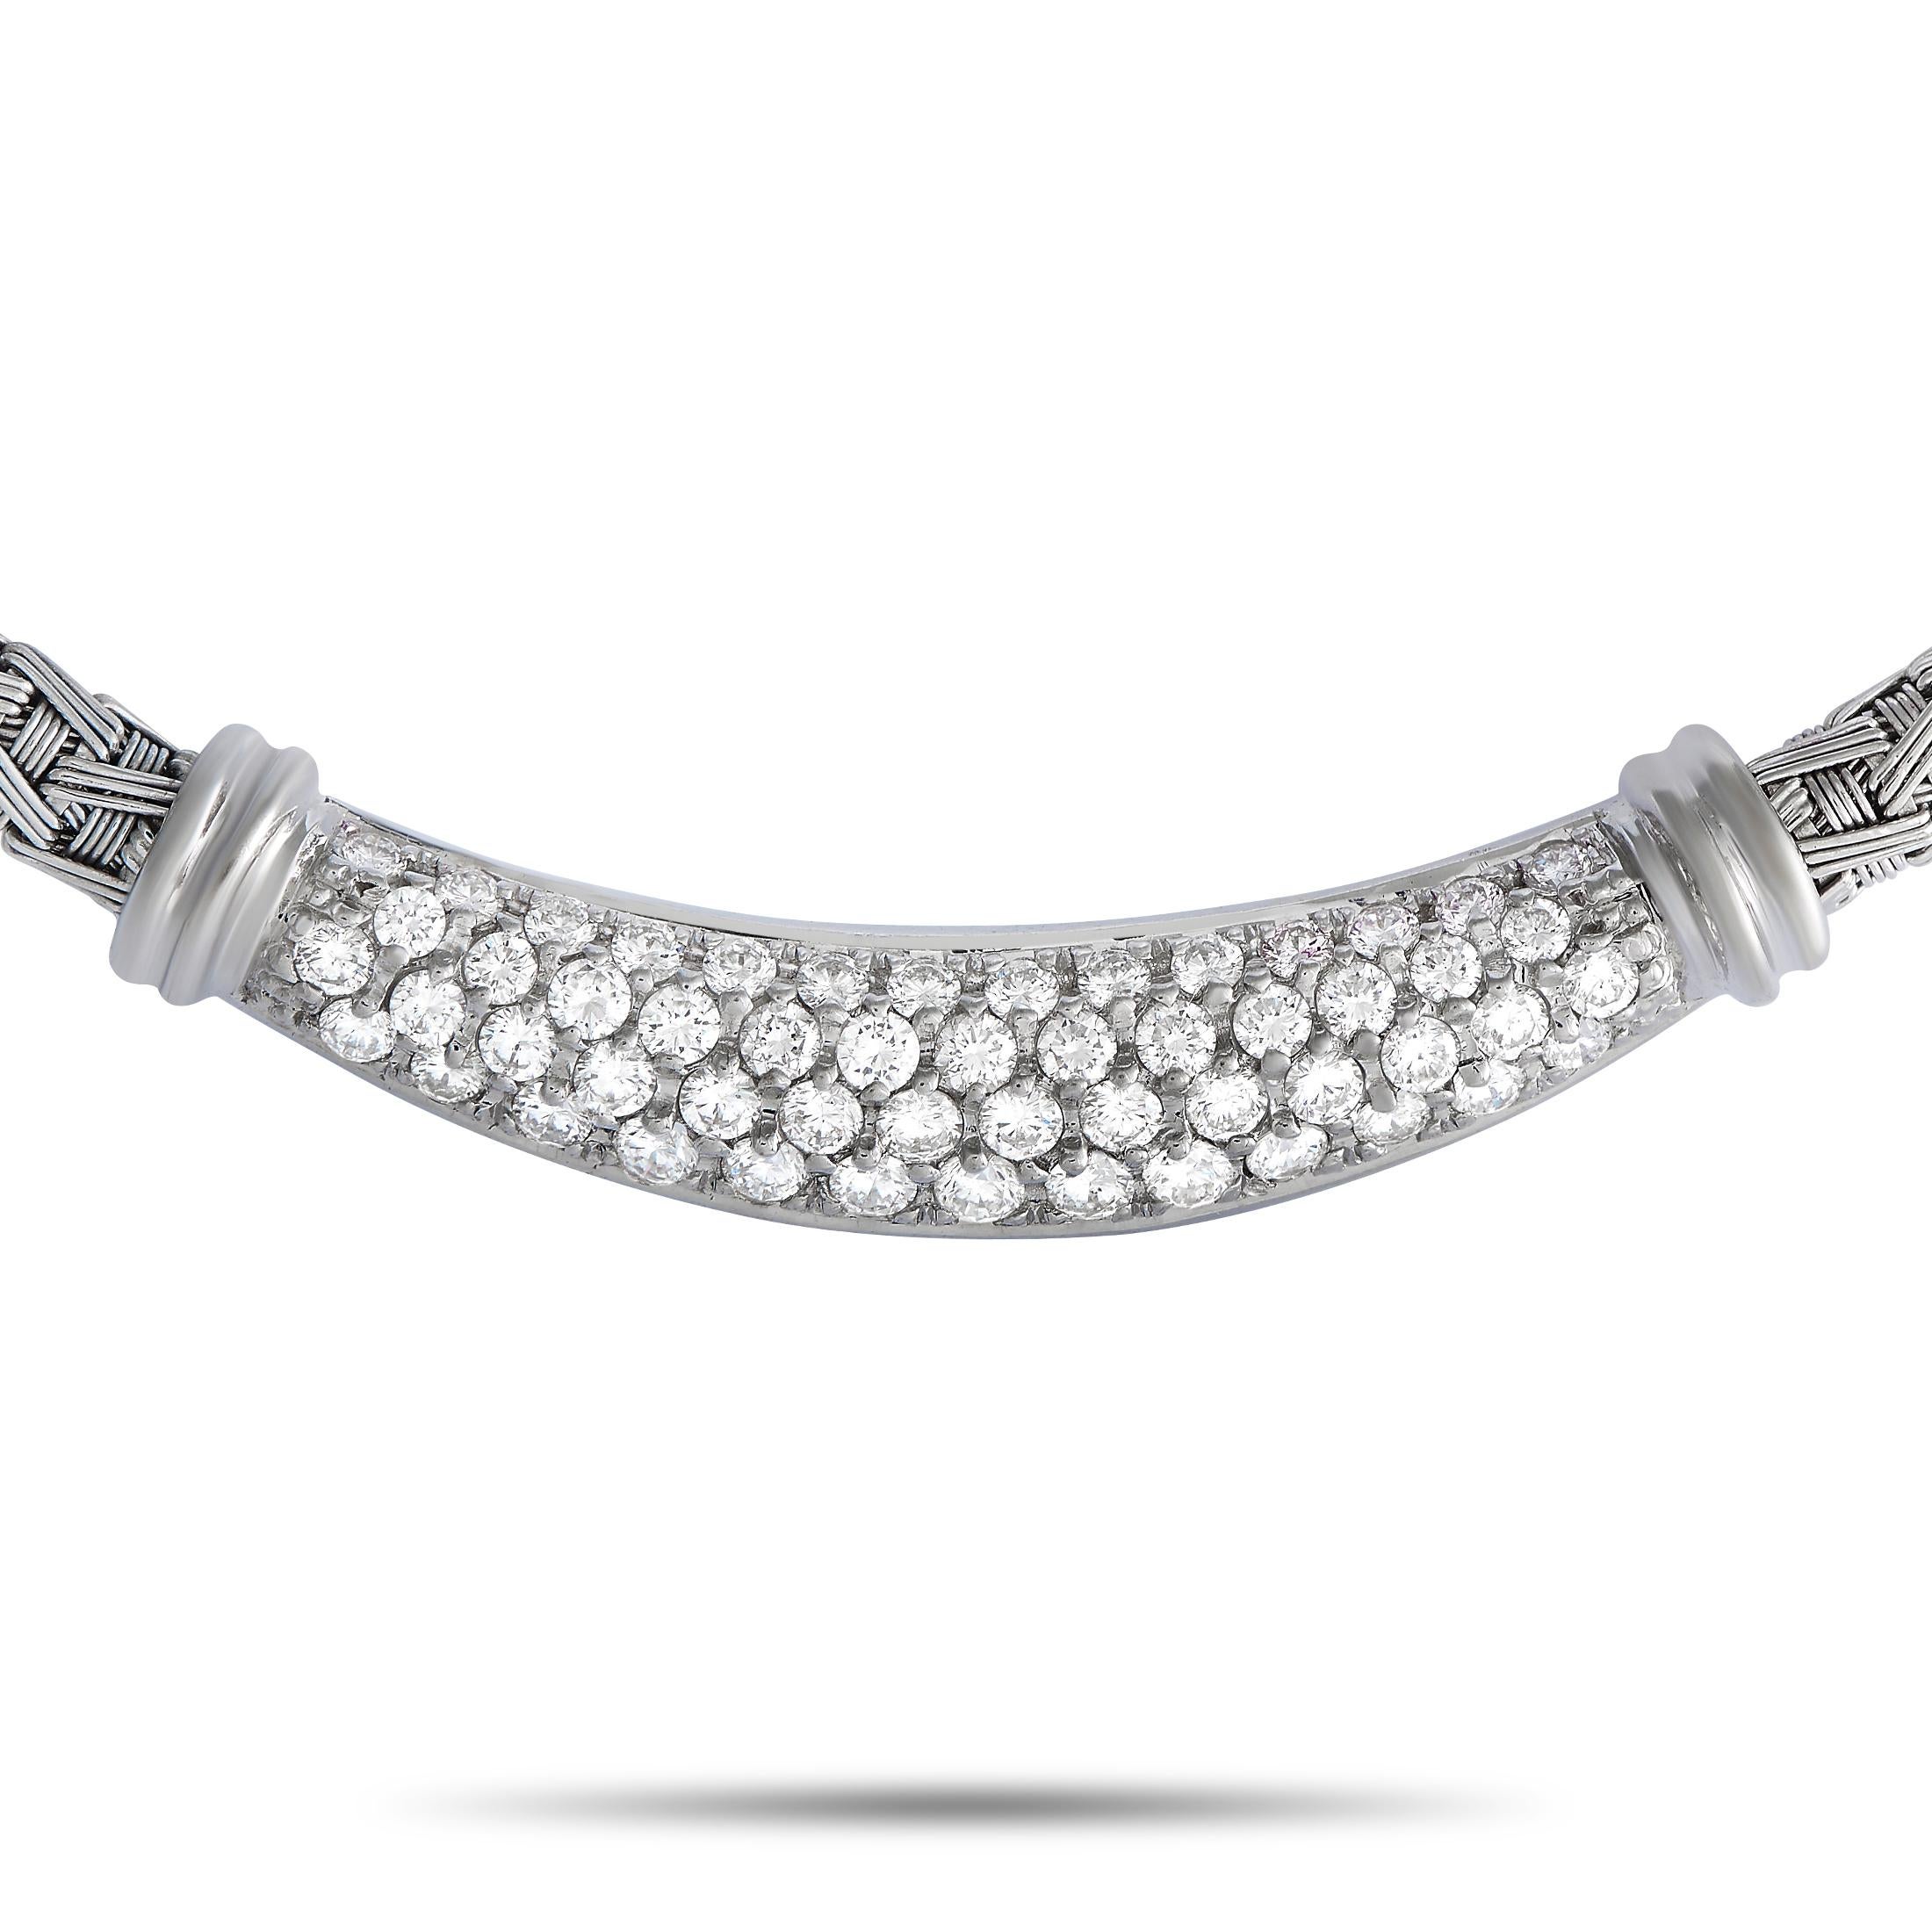 This Roberto Coin necklace beautifully reflects Italian romance and contemporary elegance. It features a woven-designed necklace measuring 15 inches long. Serving as its focal point is a white gold tubular 